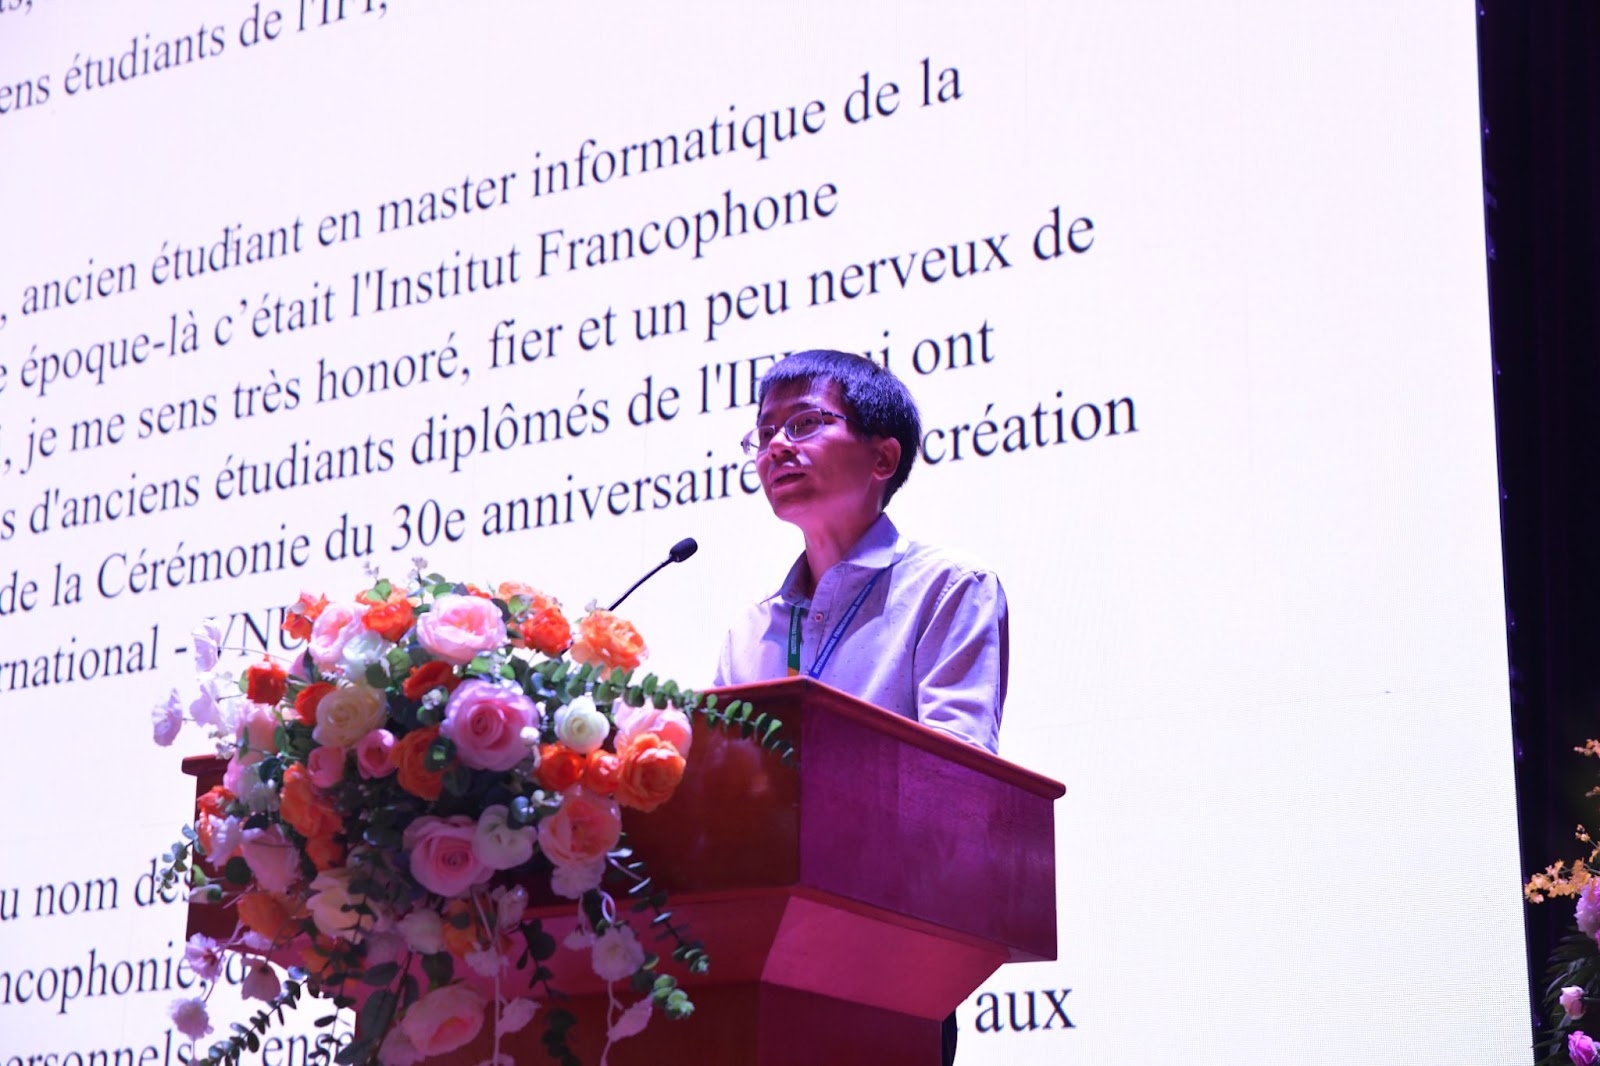 Mr. Ngô Hồng Sơn, a former student of Cohort 6, delivered a speech during the ceremony